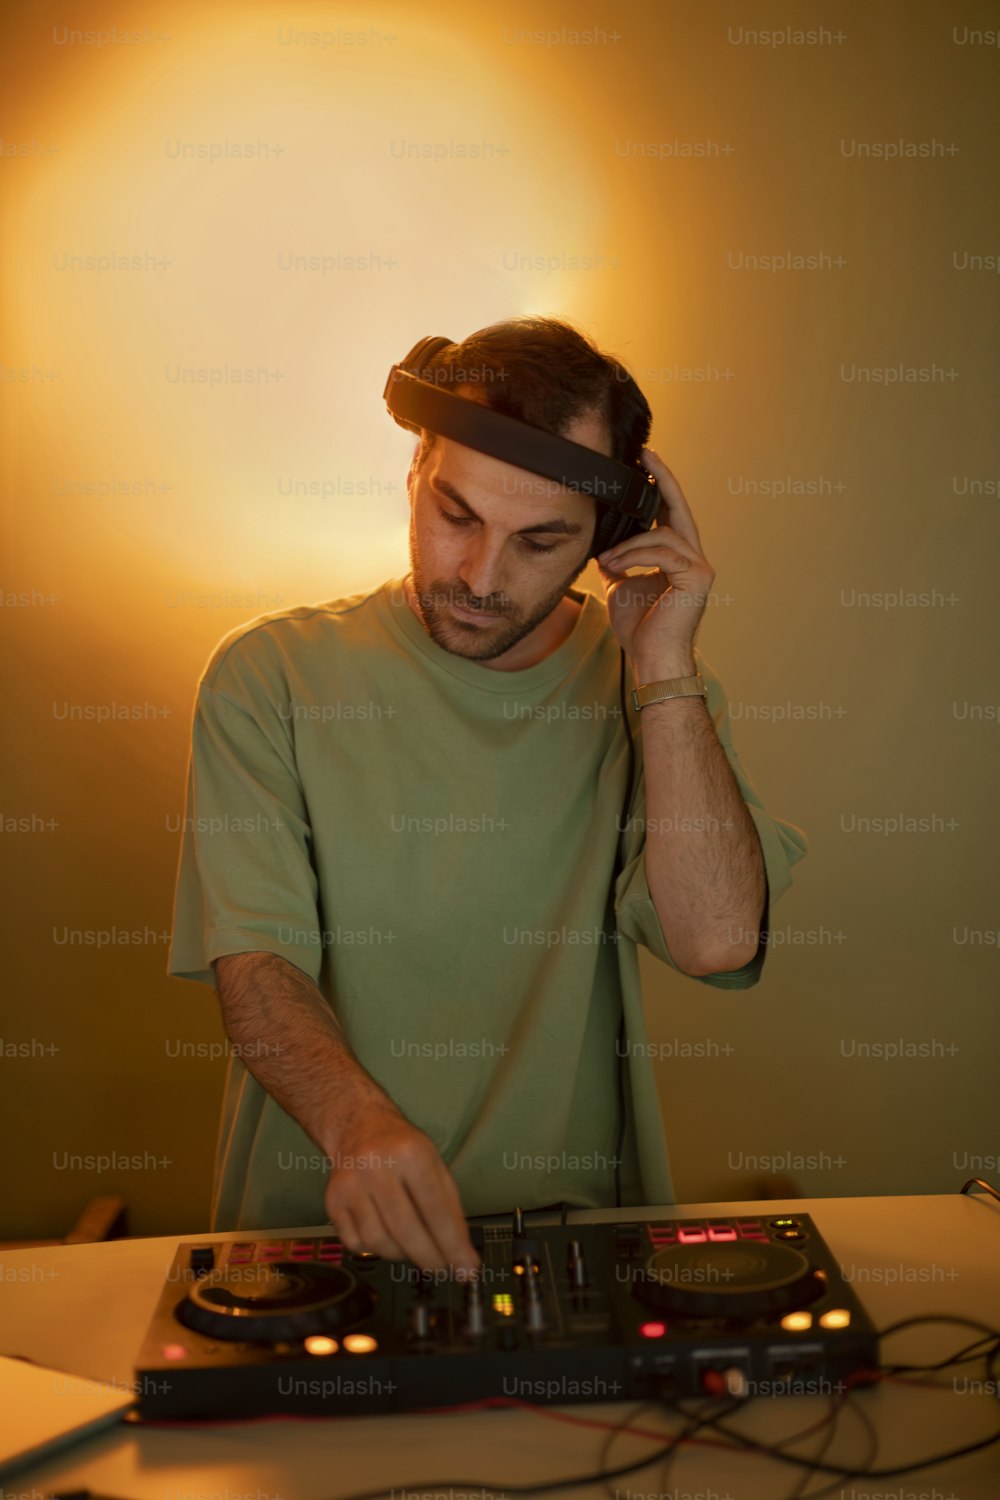 a man in a green shirt is using a dj's turntable